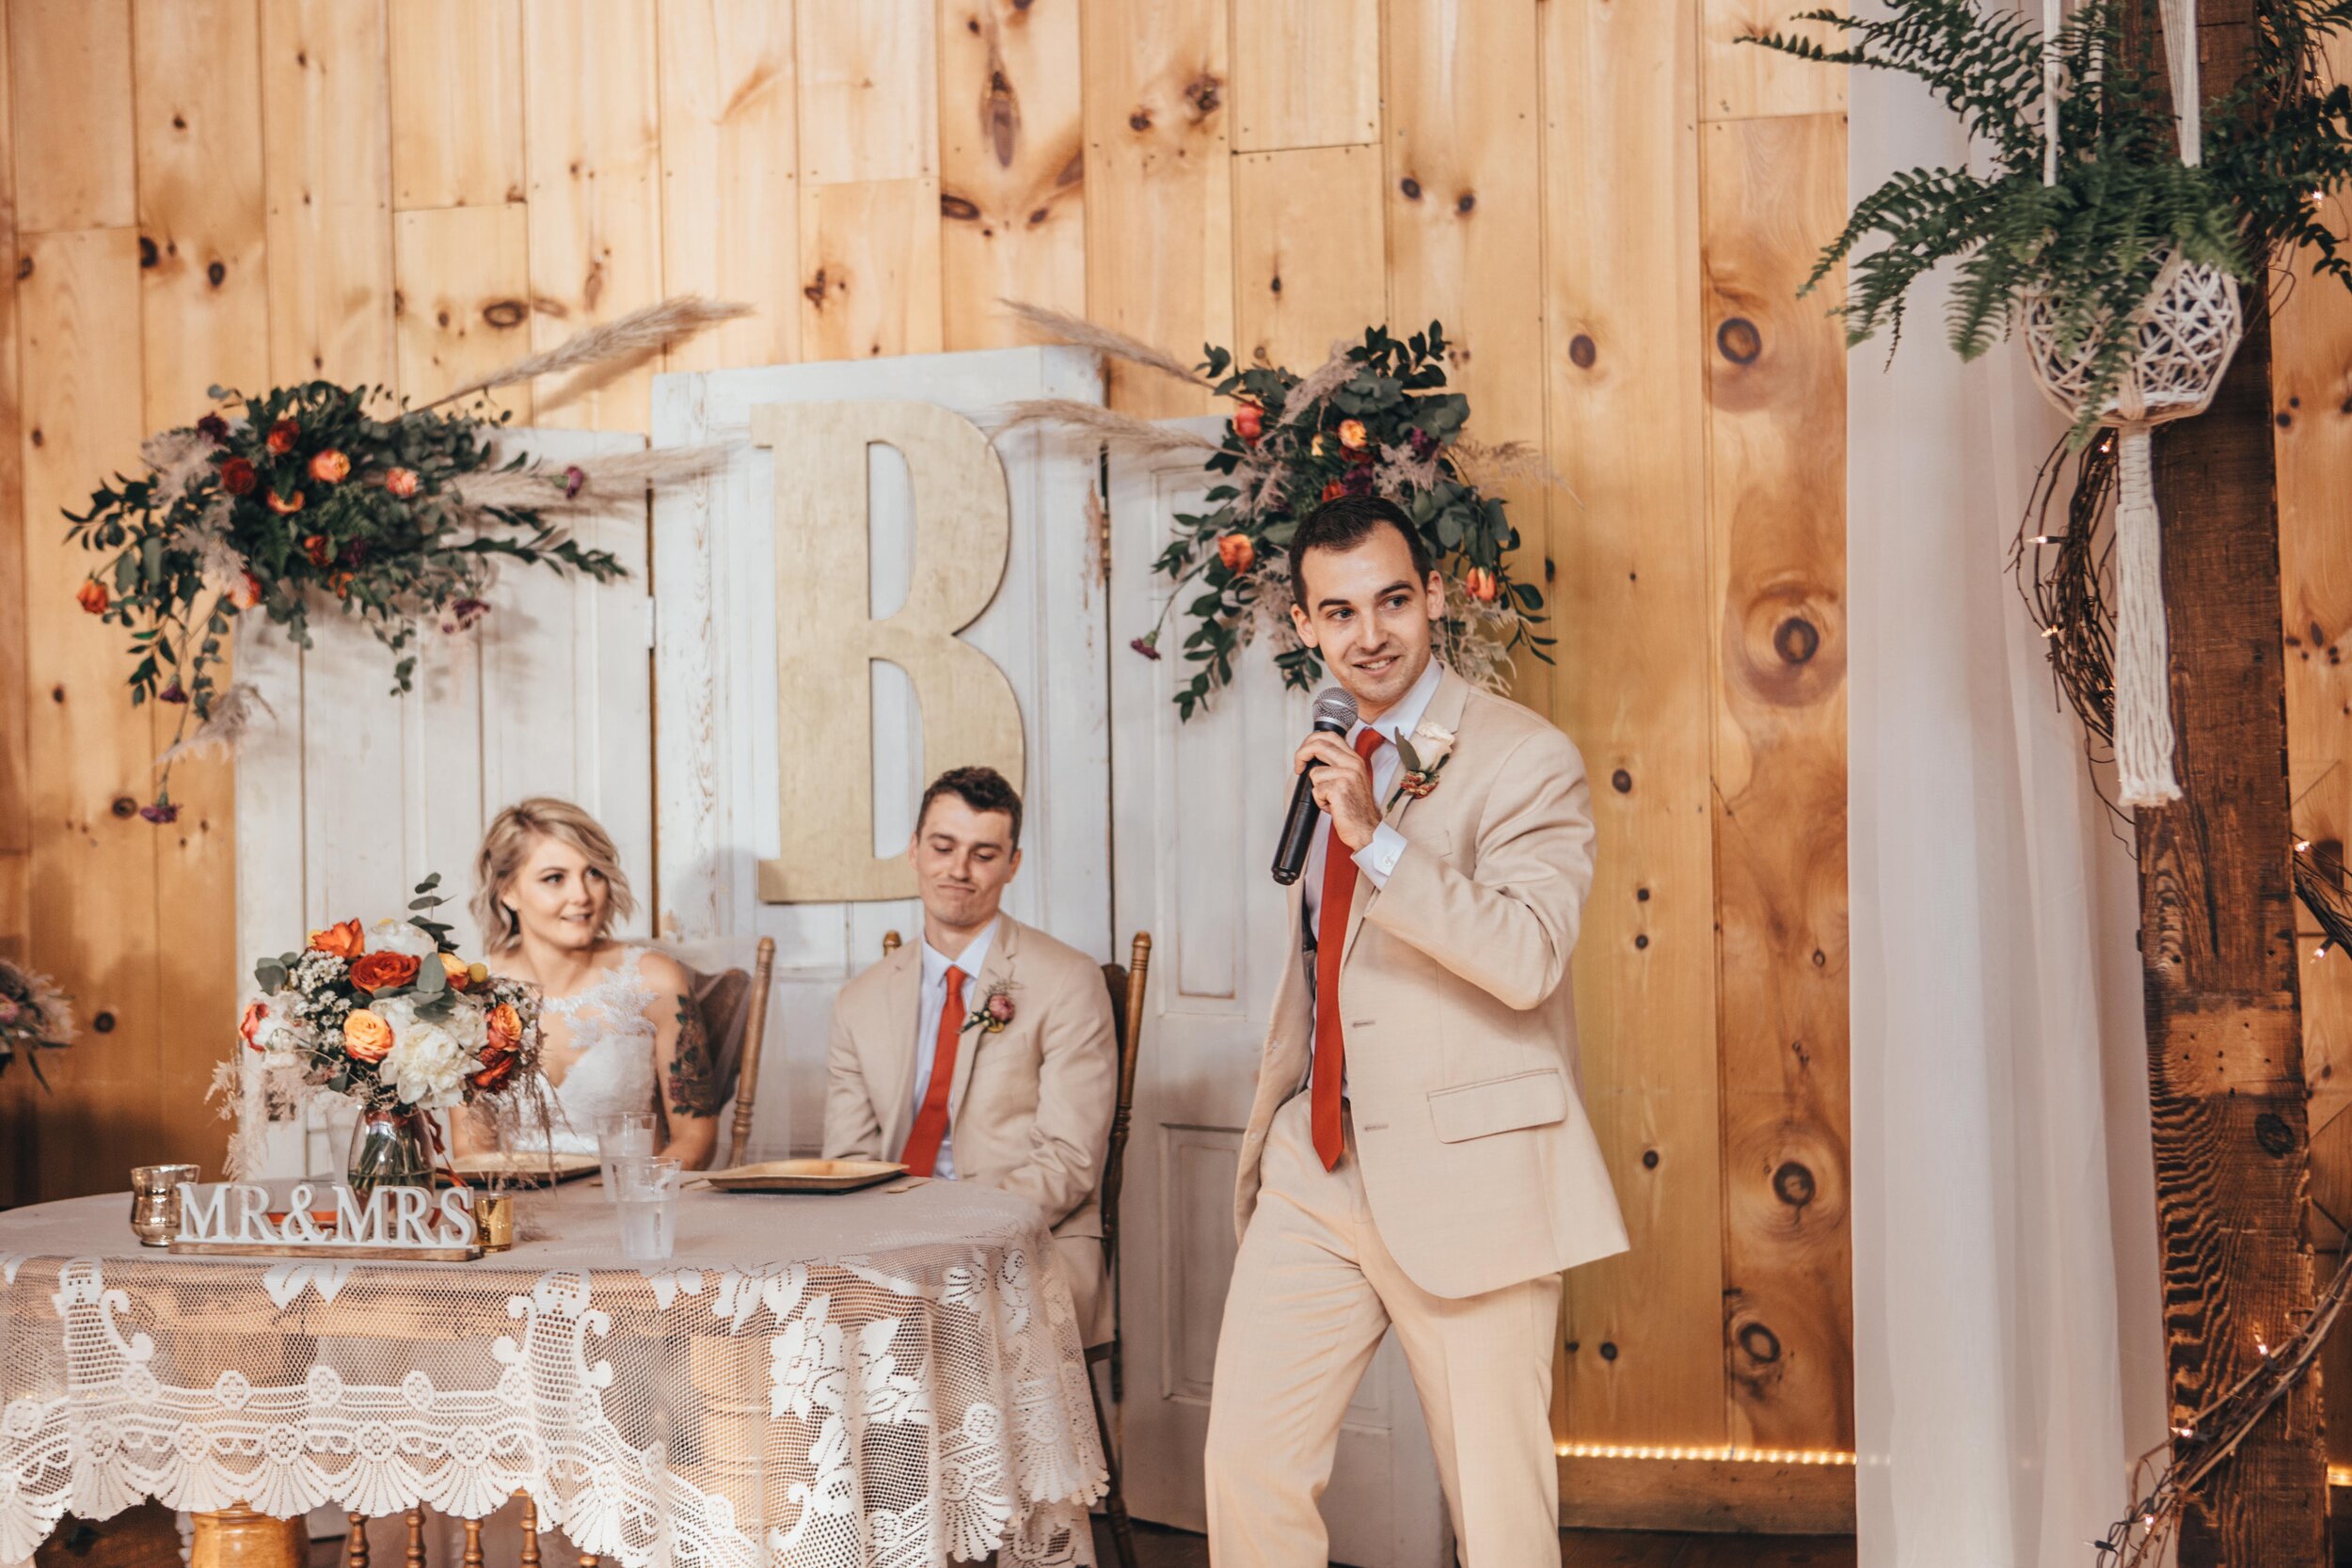 Ali and Ryan's Rust and Gold Summer Wedding at White Chimneys